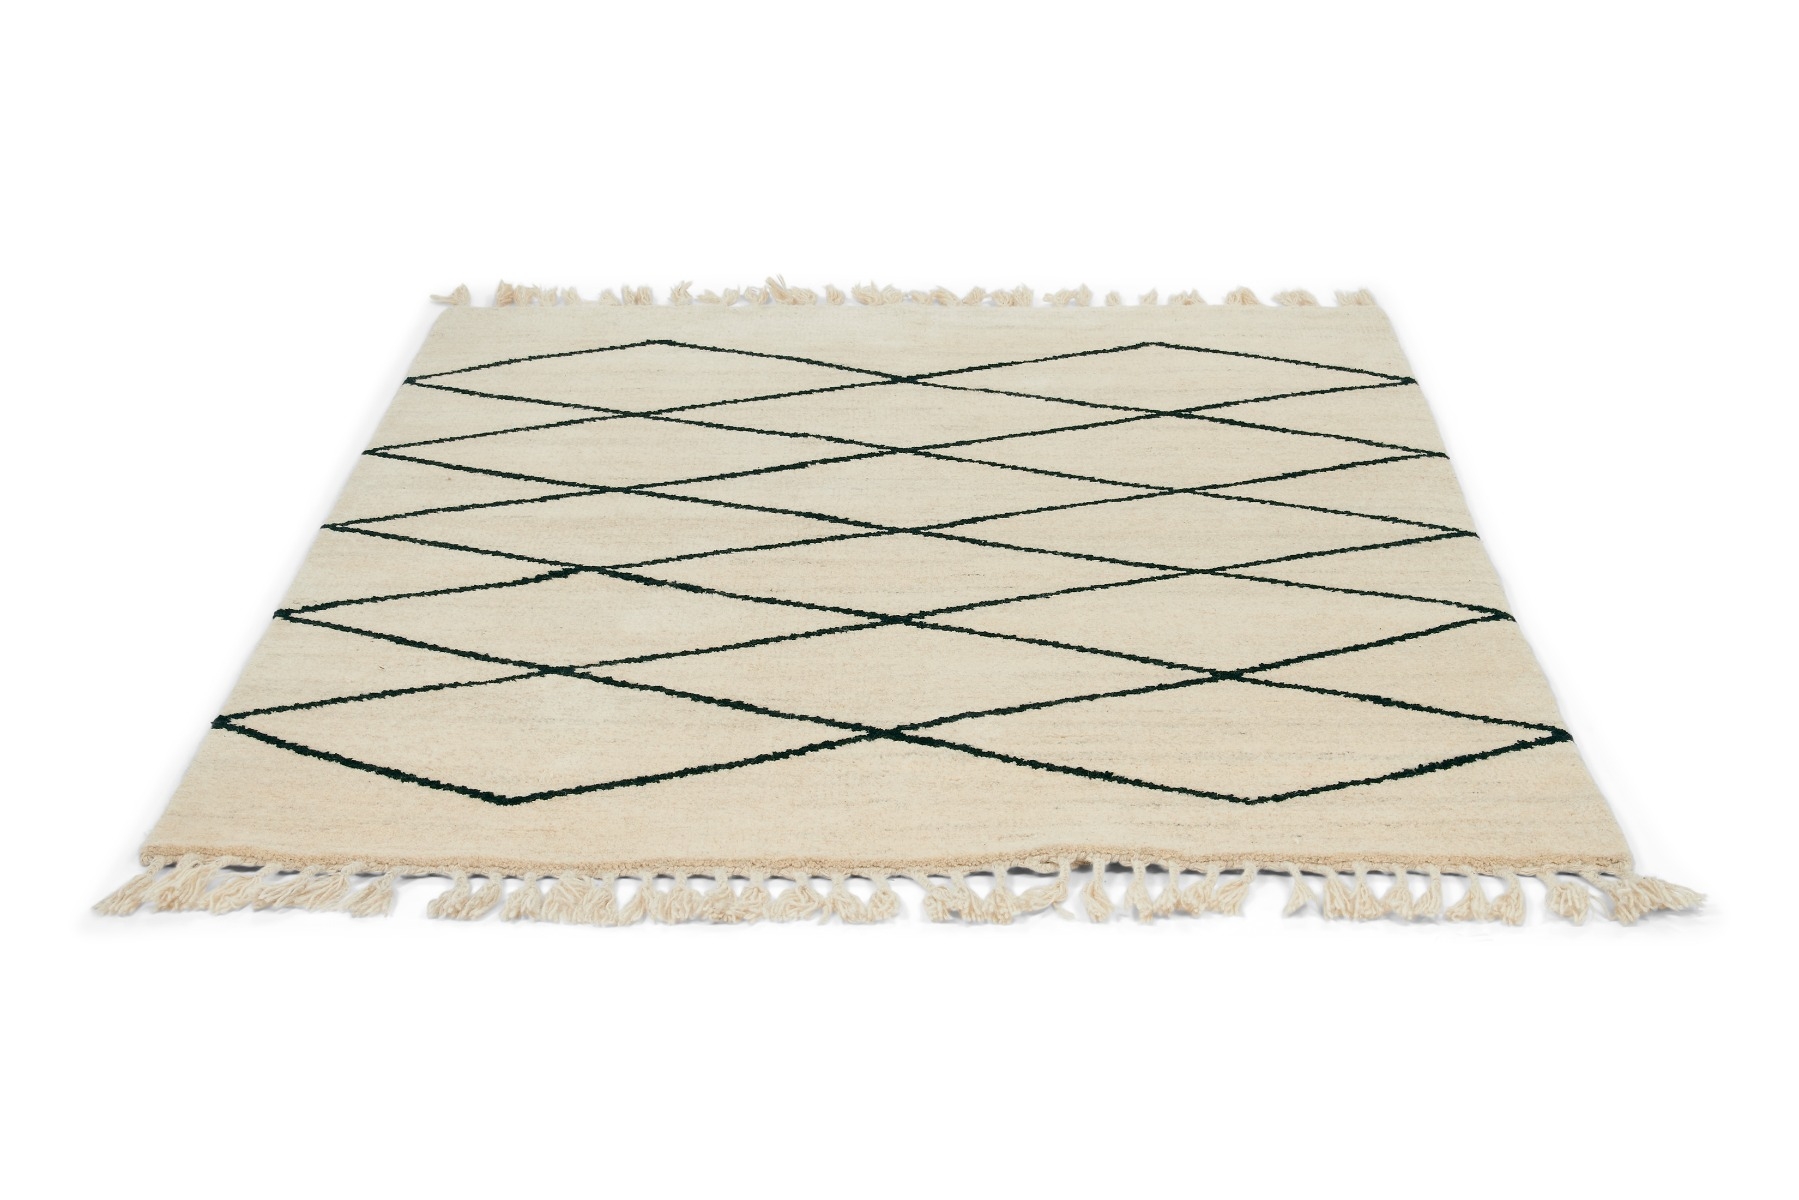 Moroccan Handknotted Rug ☞ Size: 200 x 300 cm